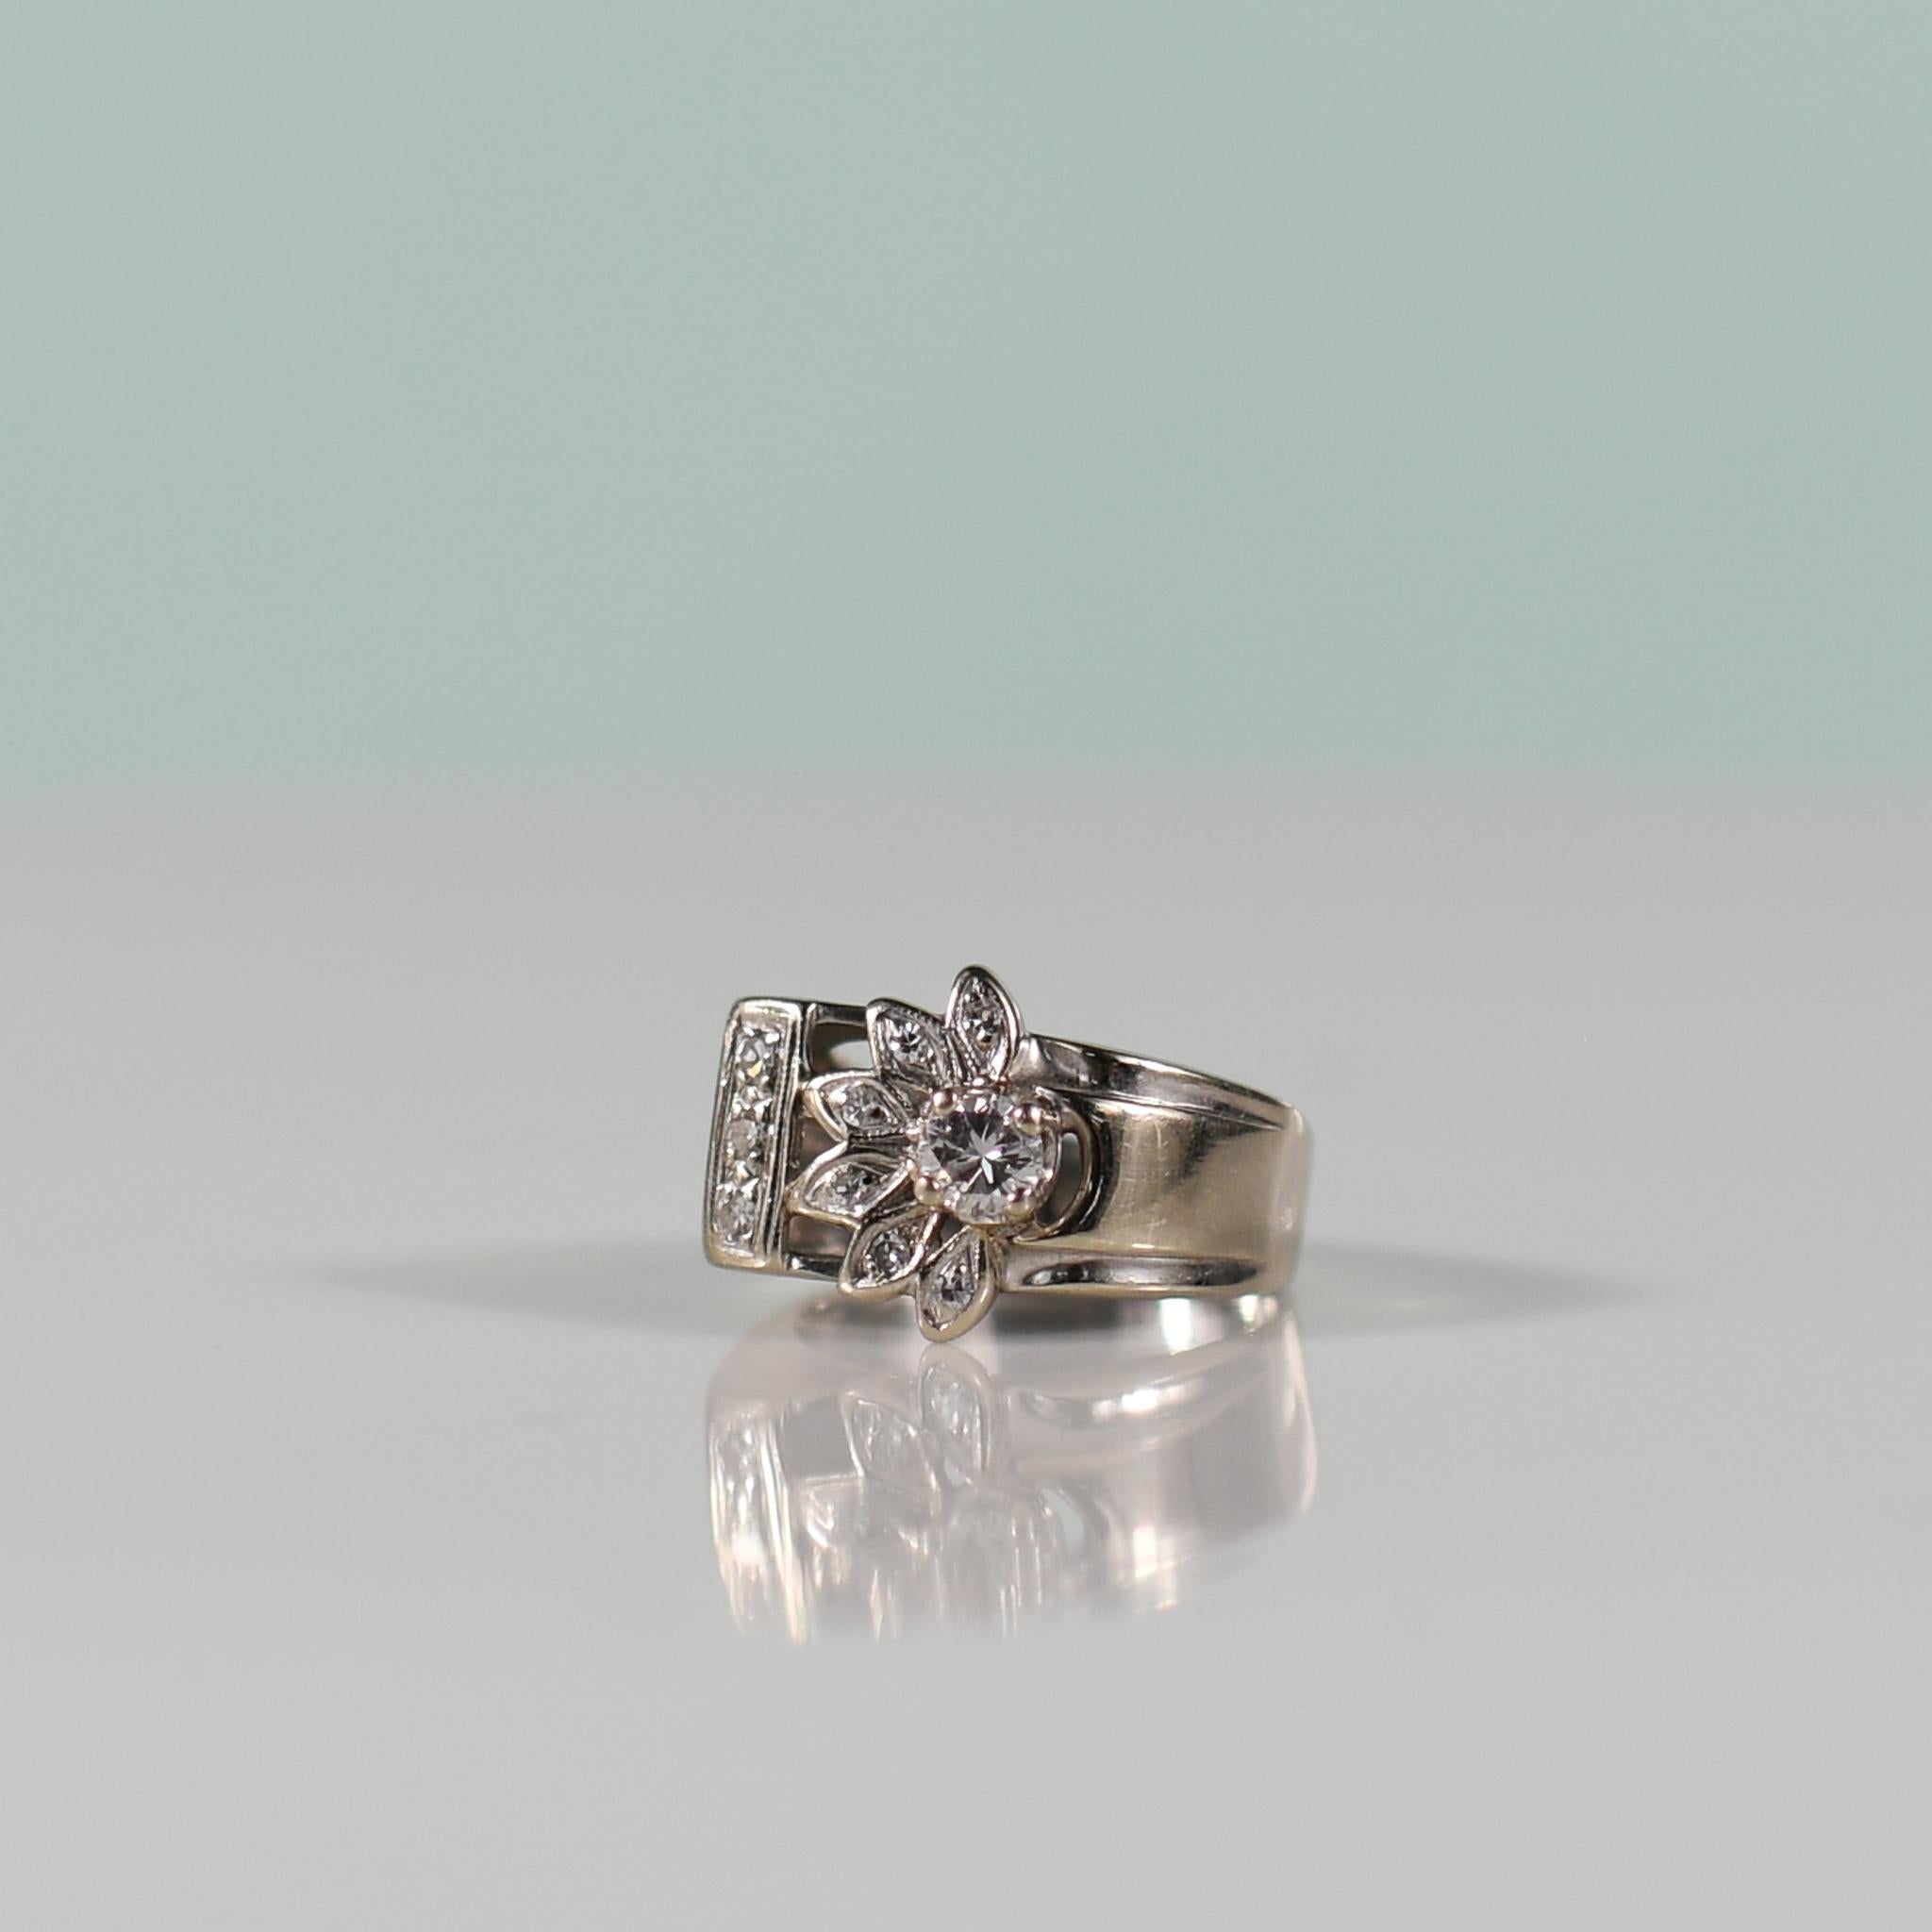 Indulge in the vintage charm of the mid-century era with this captivating half sunflower diamond ring. Its centerpiece features a dazzling 0.33 carat round brilliant cut diamond, radiating brilliance and elegance. Surrounding it are nine accent